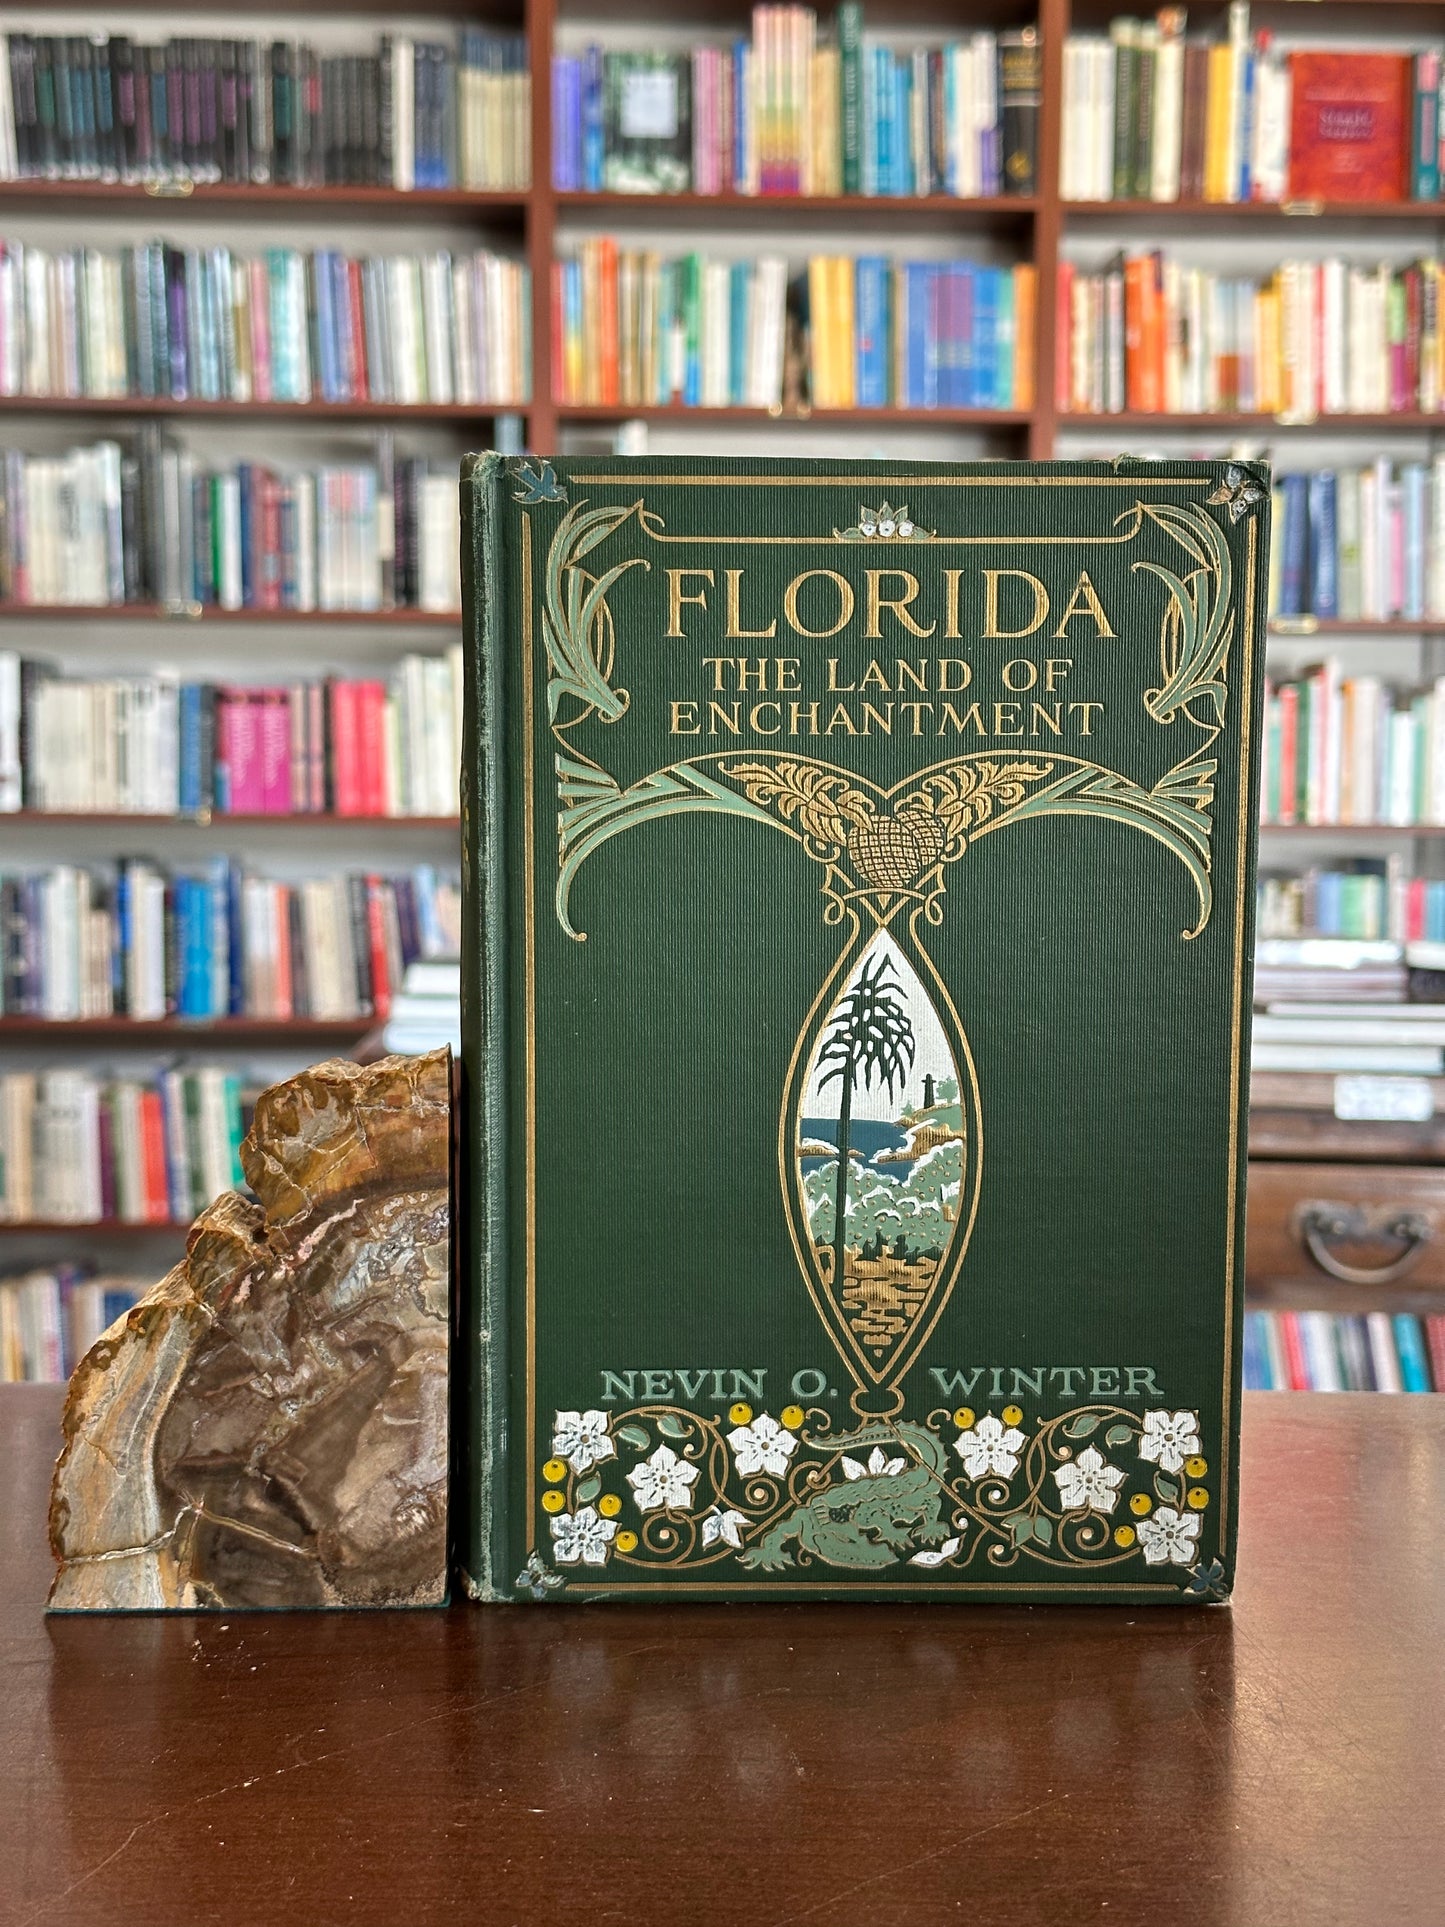 Florida: The Land of Enchantment by Nevin O. Winter